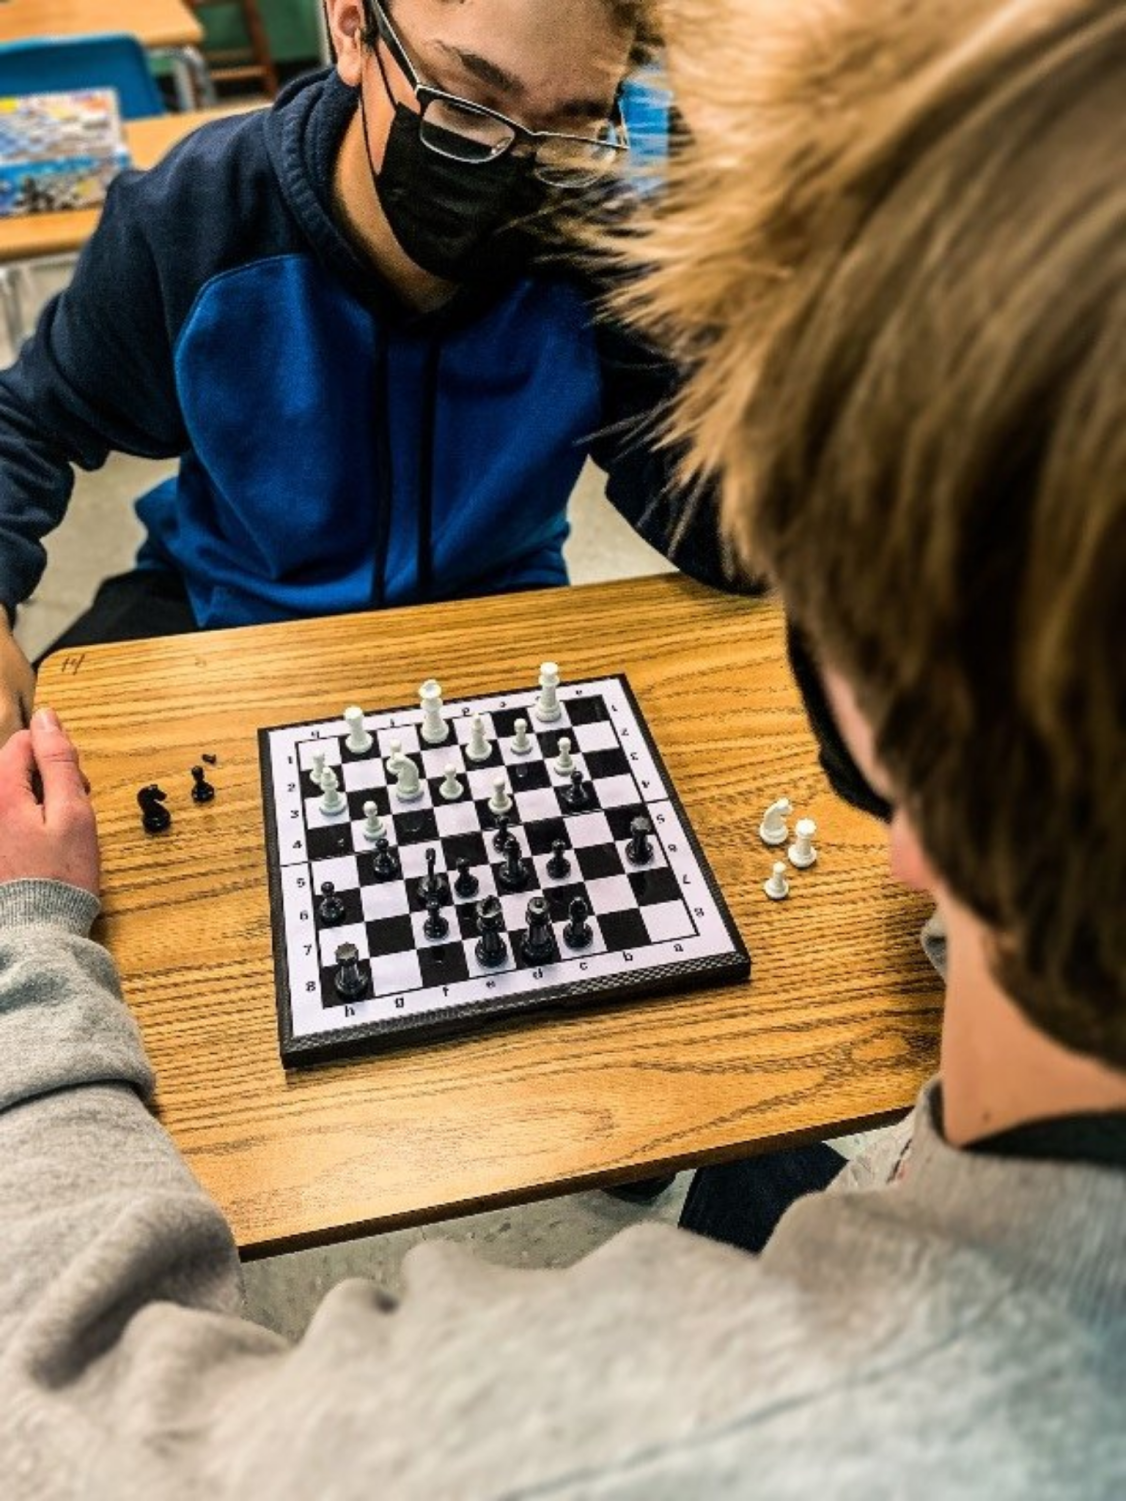 Nick Rentschler (9) and Jared Corbett (11) play an intense game of chess. Corbett playing as black won the match against Rentschler.